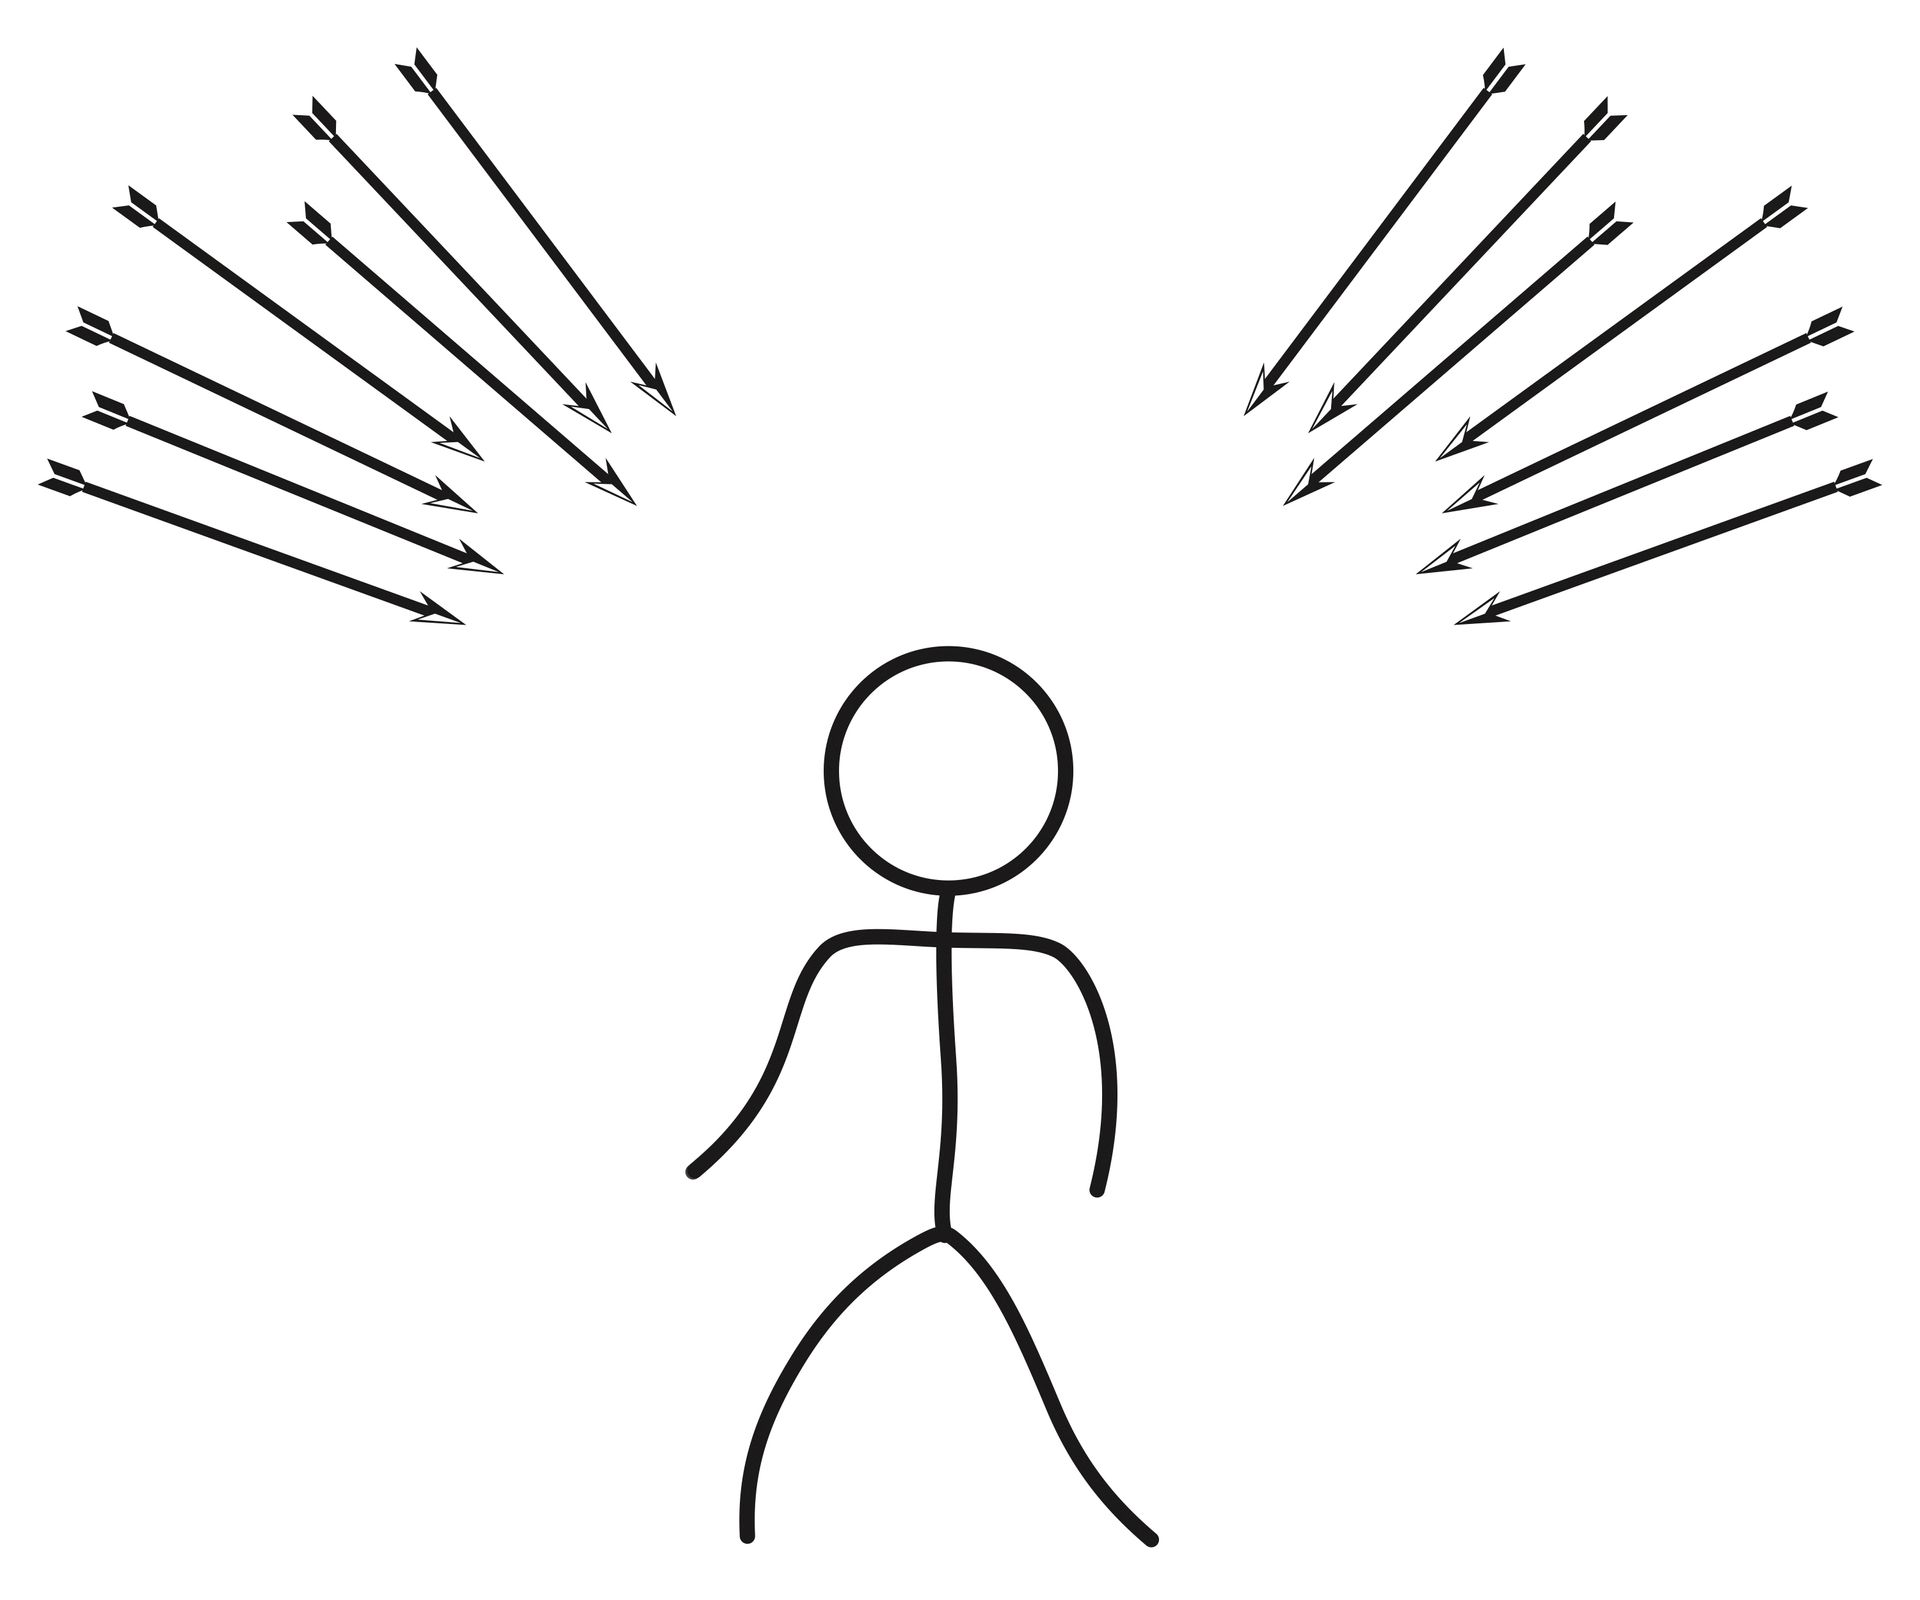 A stick figure drawing of a person surrounded by arrows.